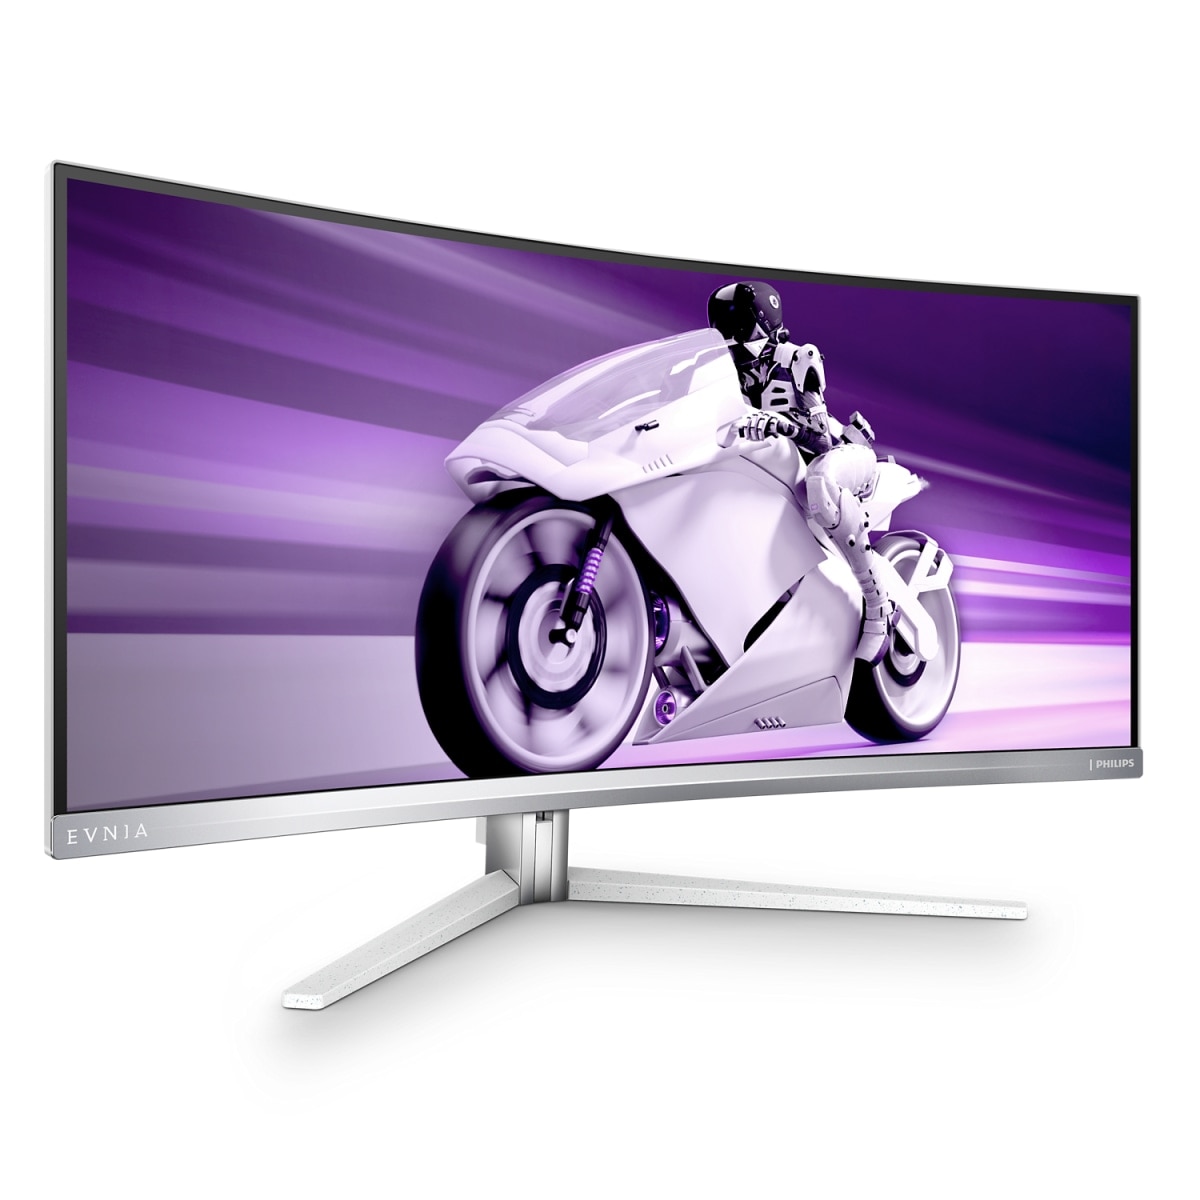 Philips Curved-Gaming-OLED-Monitor »EVNIA 34M2C8600«, 34 cm/86 Zoll, 3440 x 1440 px, 0,1 ms Reaktionszeit, 175 Hz